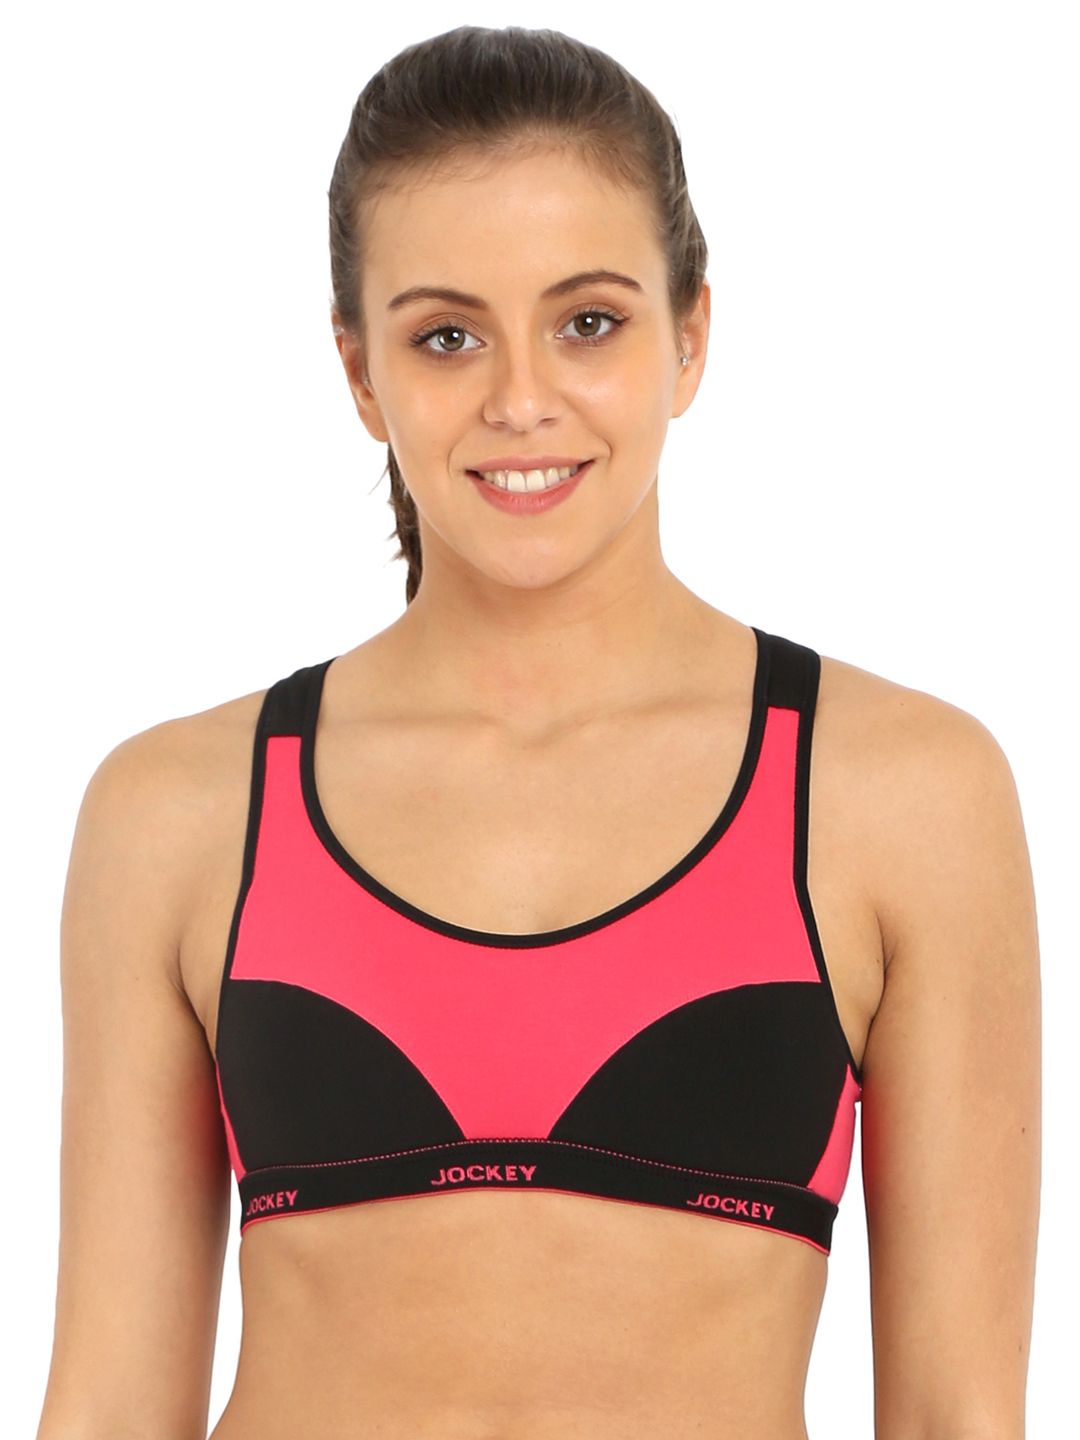 Jockey Pink & Black Colourblocked Non-Wired Lightly Padded Sports Bra Price in India